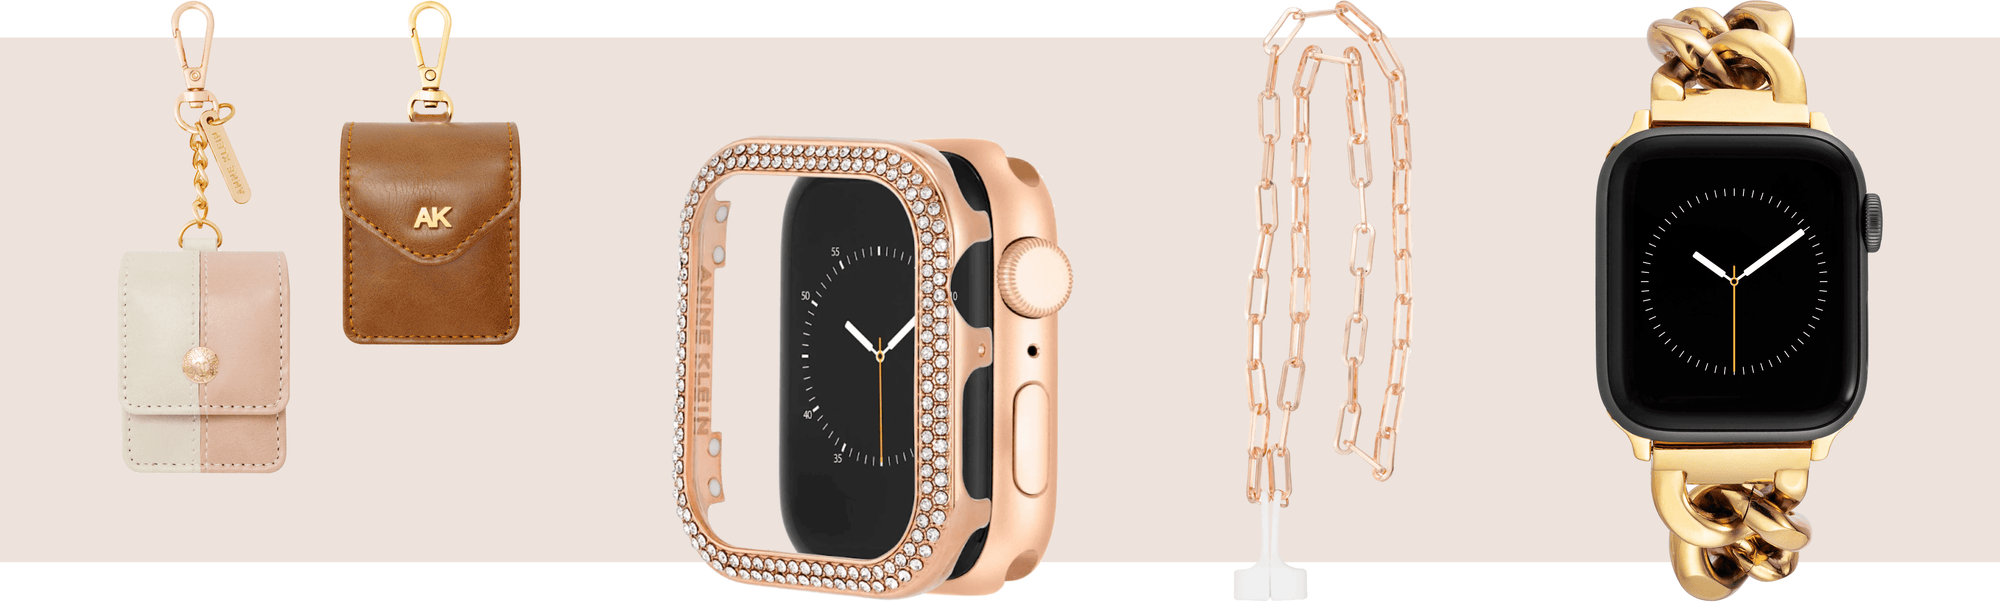 Apple Accessories From Anne Klein - Our Gift Guide